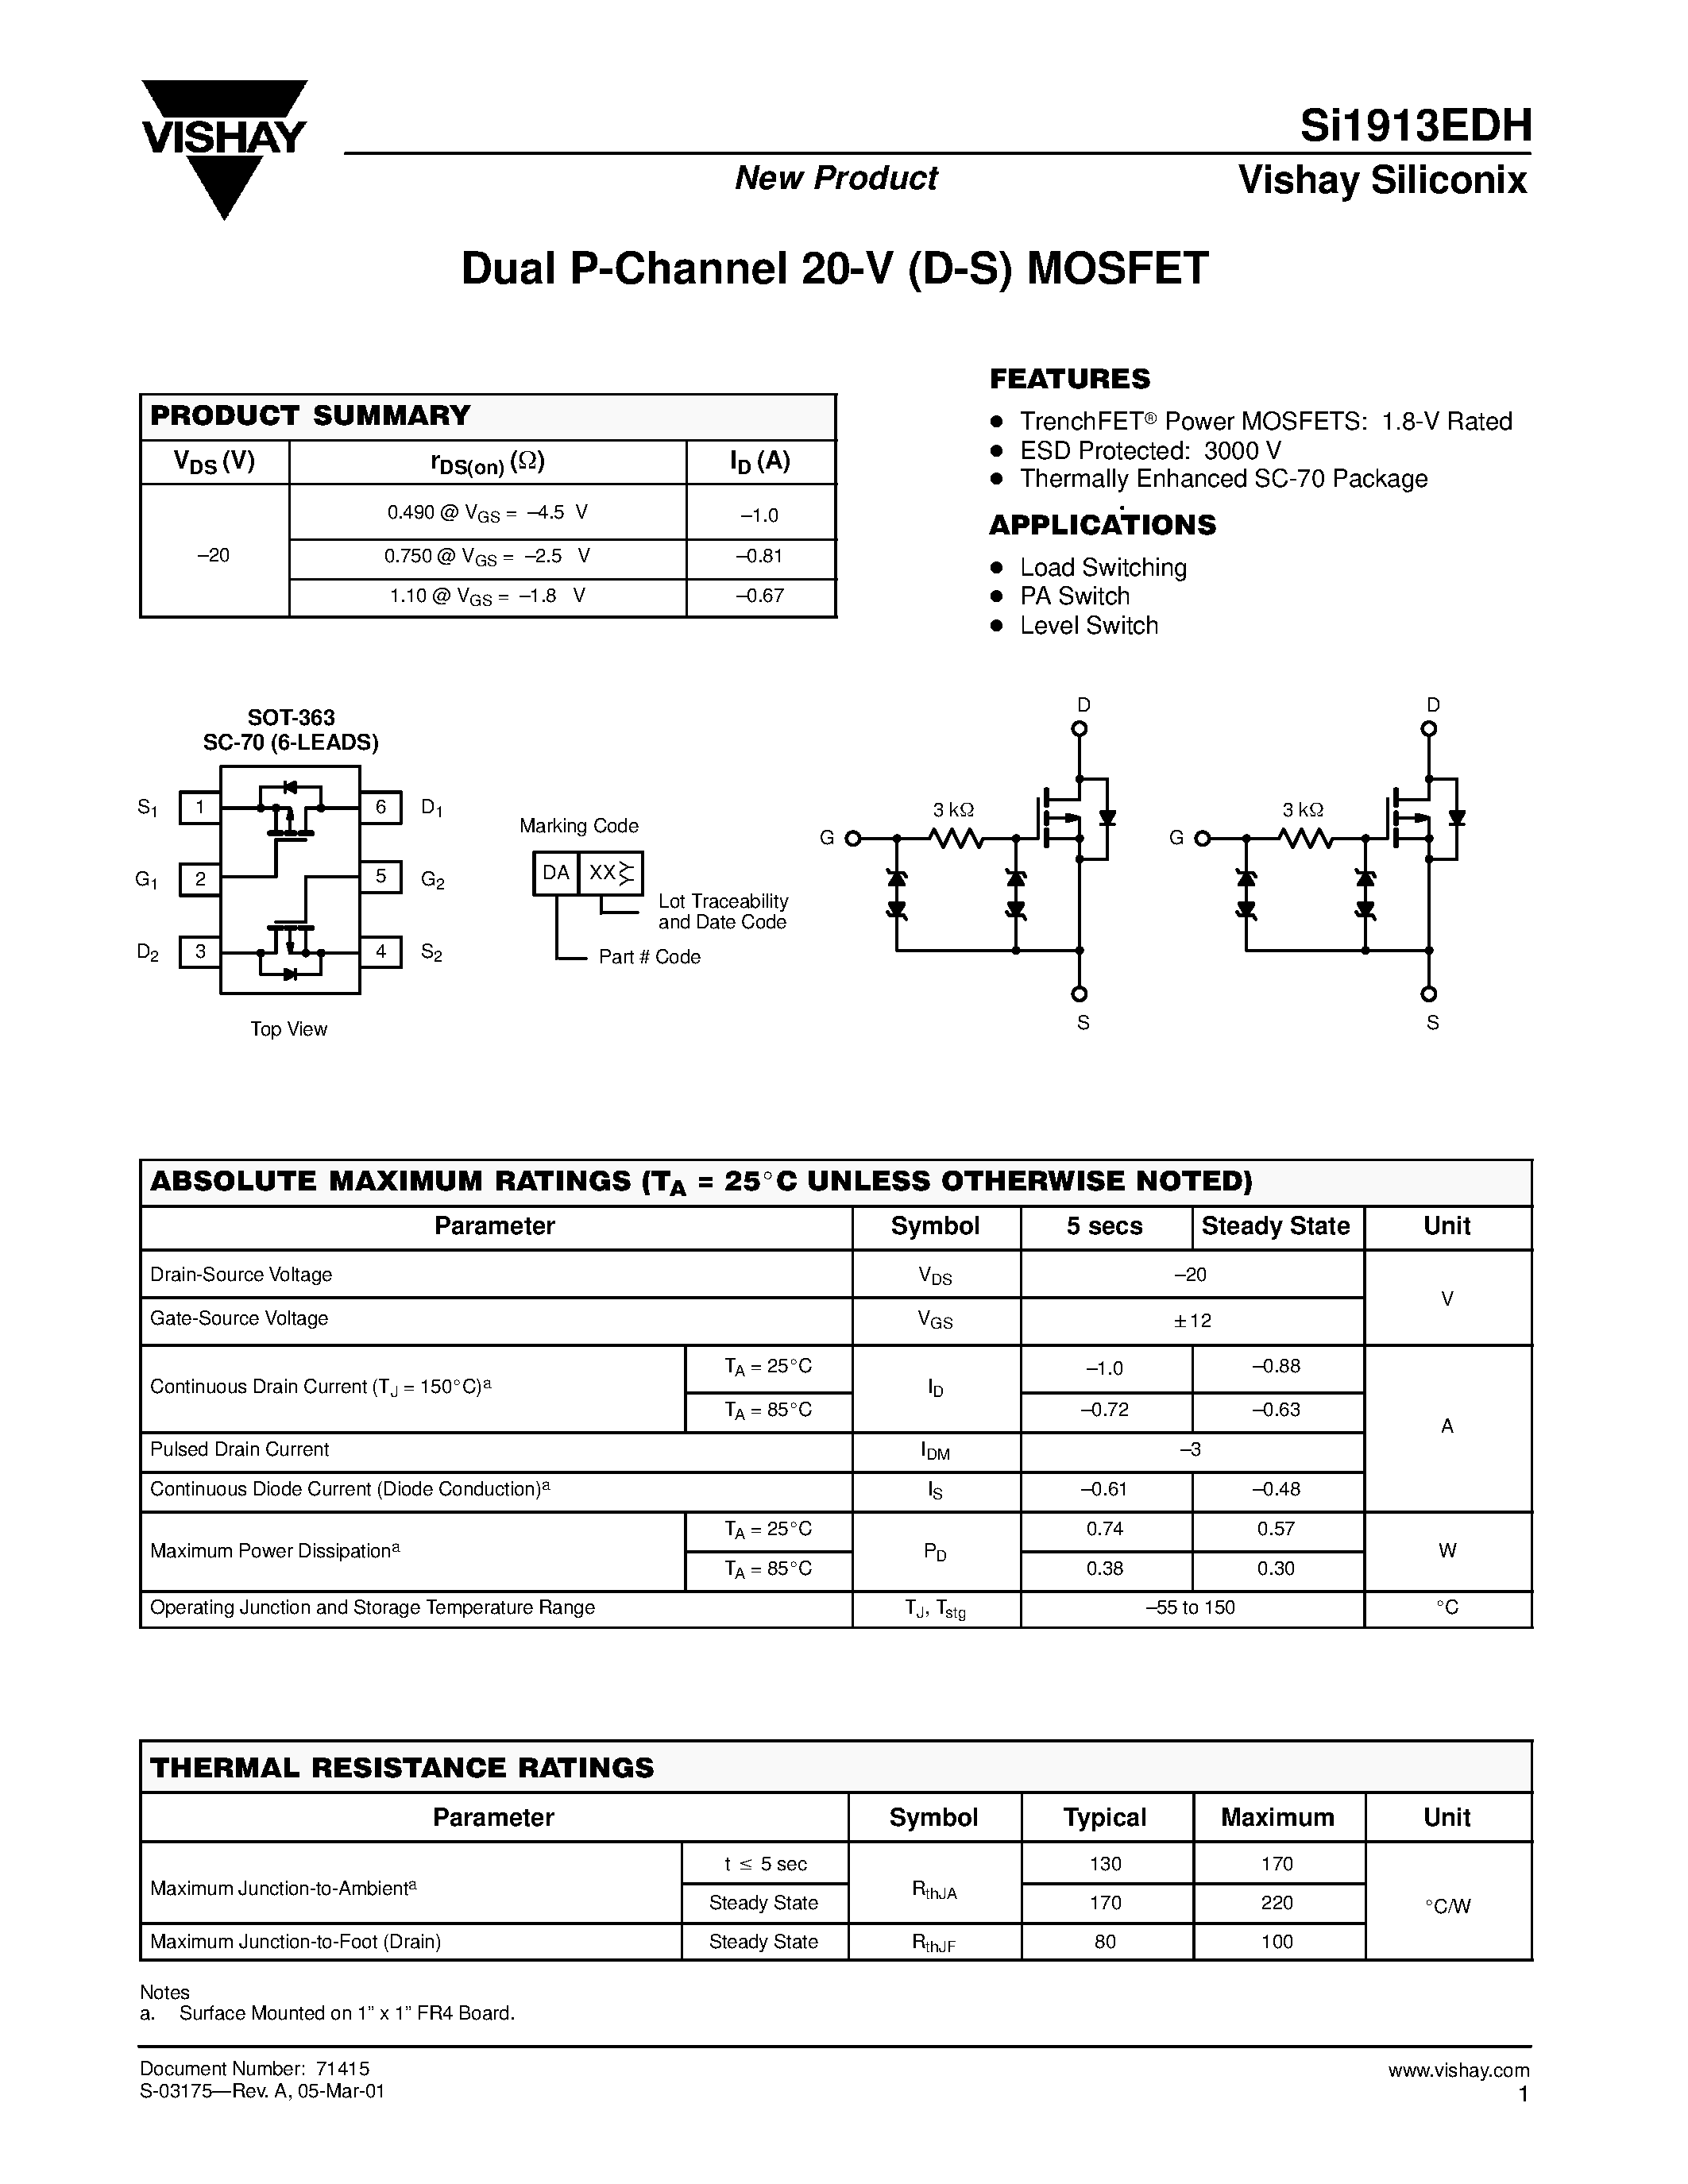 Datasheet SI1913EDH - Dual P-Channel 20-V (D-S) MOSFET page 1